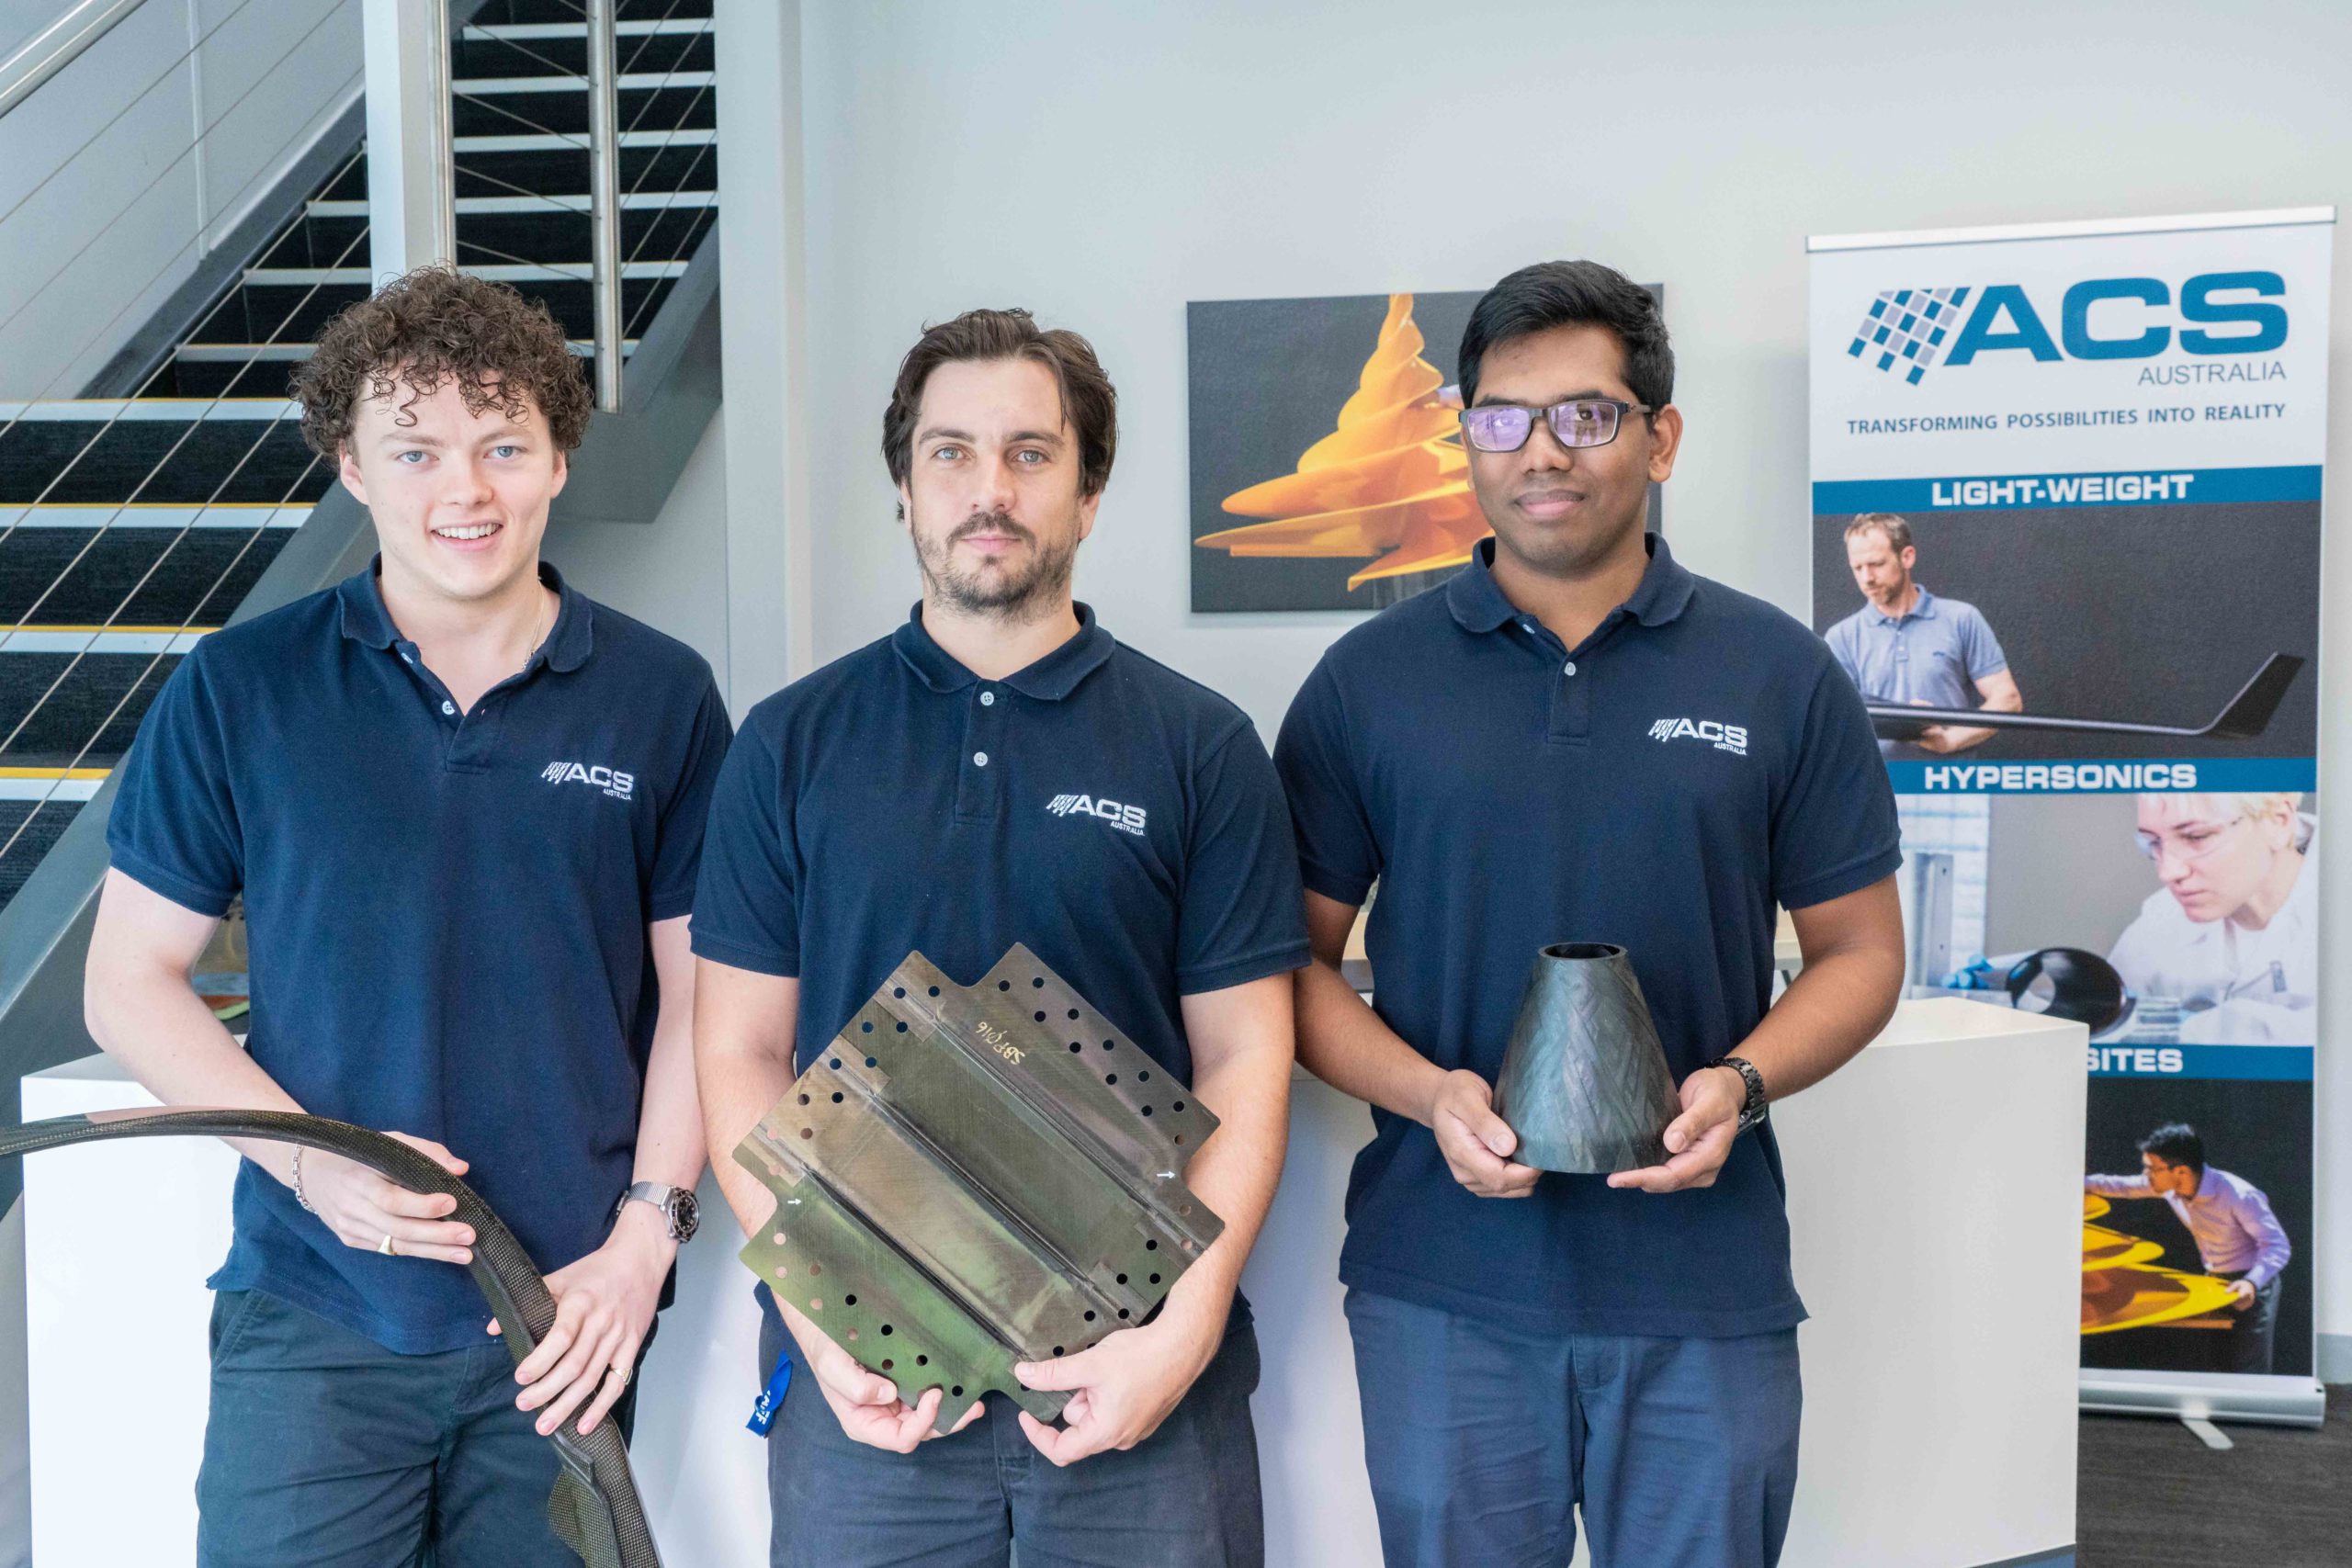 (L-R) Group photo of Defence Industry Internship Program (DIIP) Interns Kai Farrer, Nic Rayner and Shevaan Leitan at Advanced Composite Structures Australia (ACS-A)